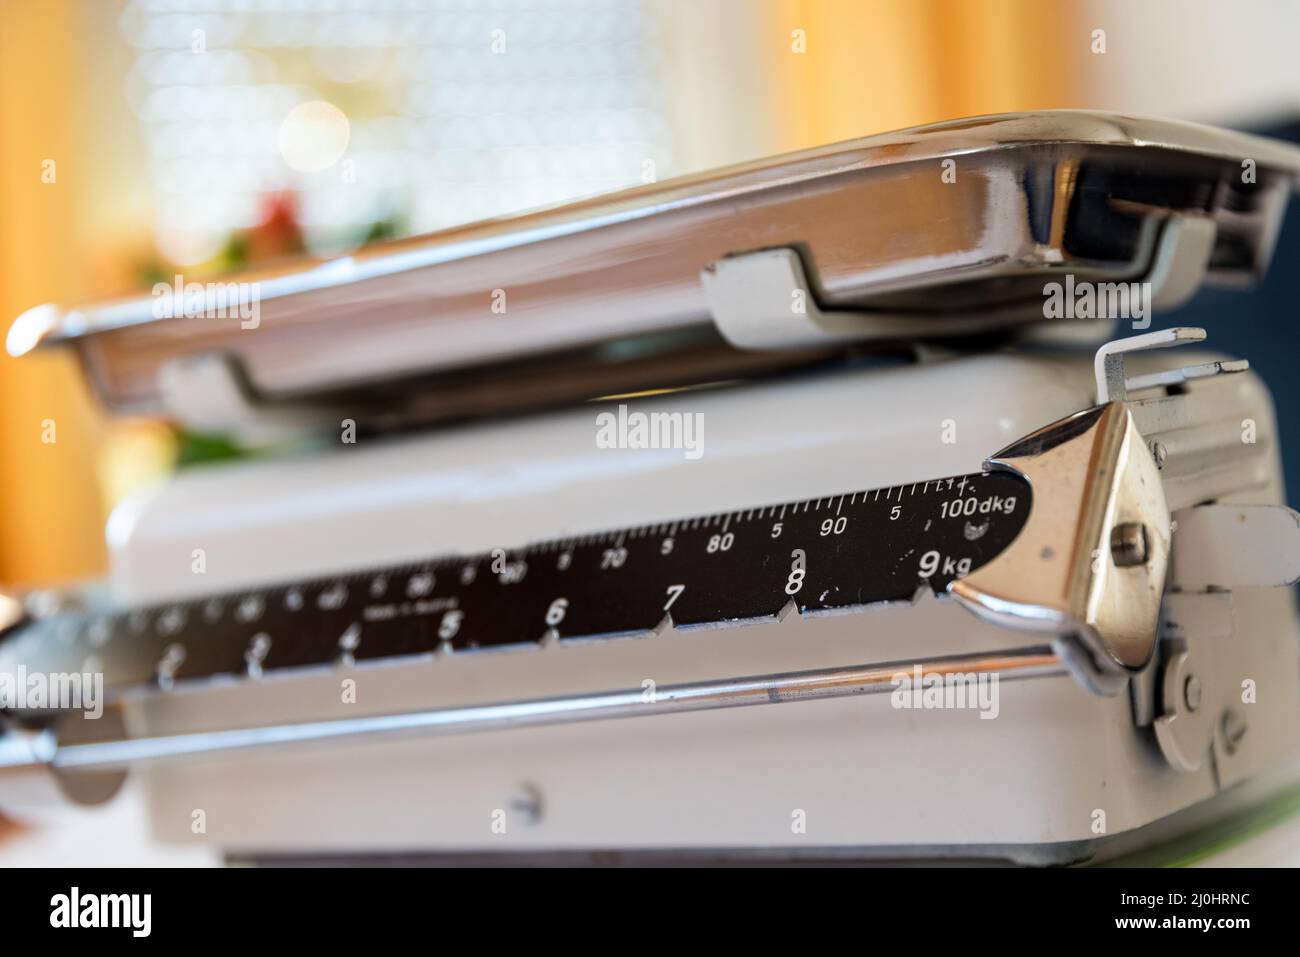 https://c8.alamy.com/comp/2J0HRNC/kitchen-scales-old-mechanical-scales-with-a-weighing-pan-2J0HRNC.jpg